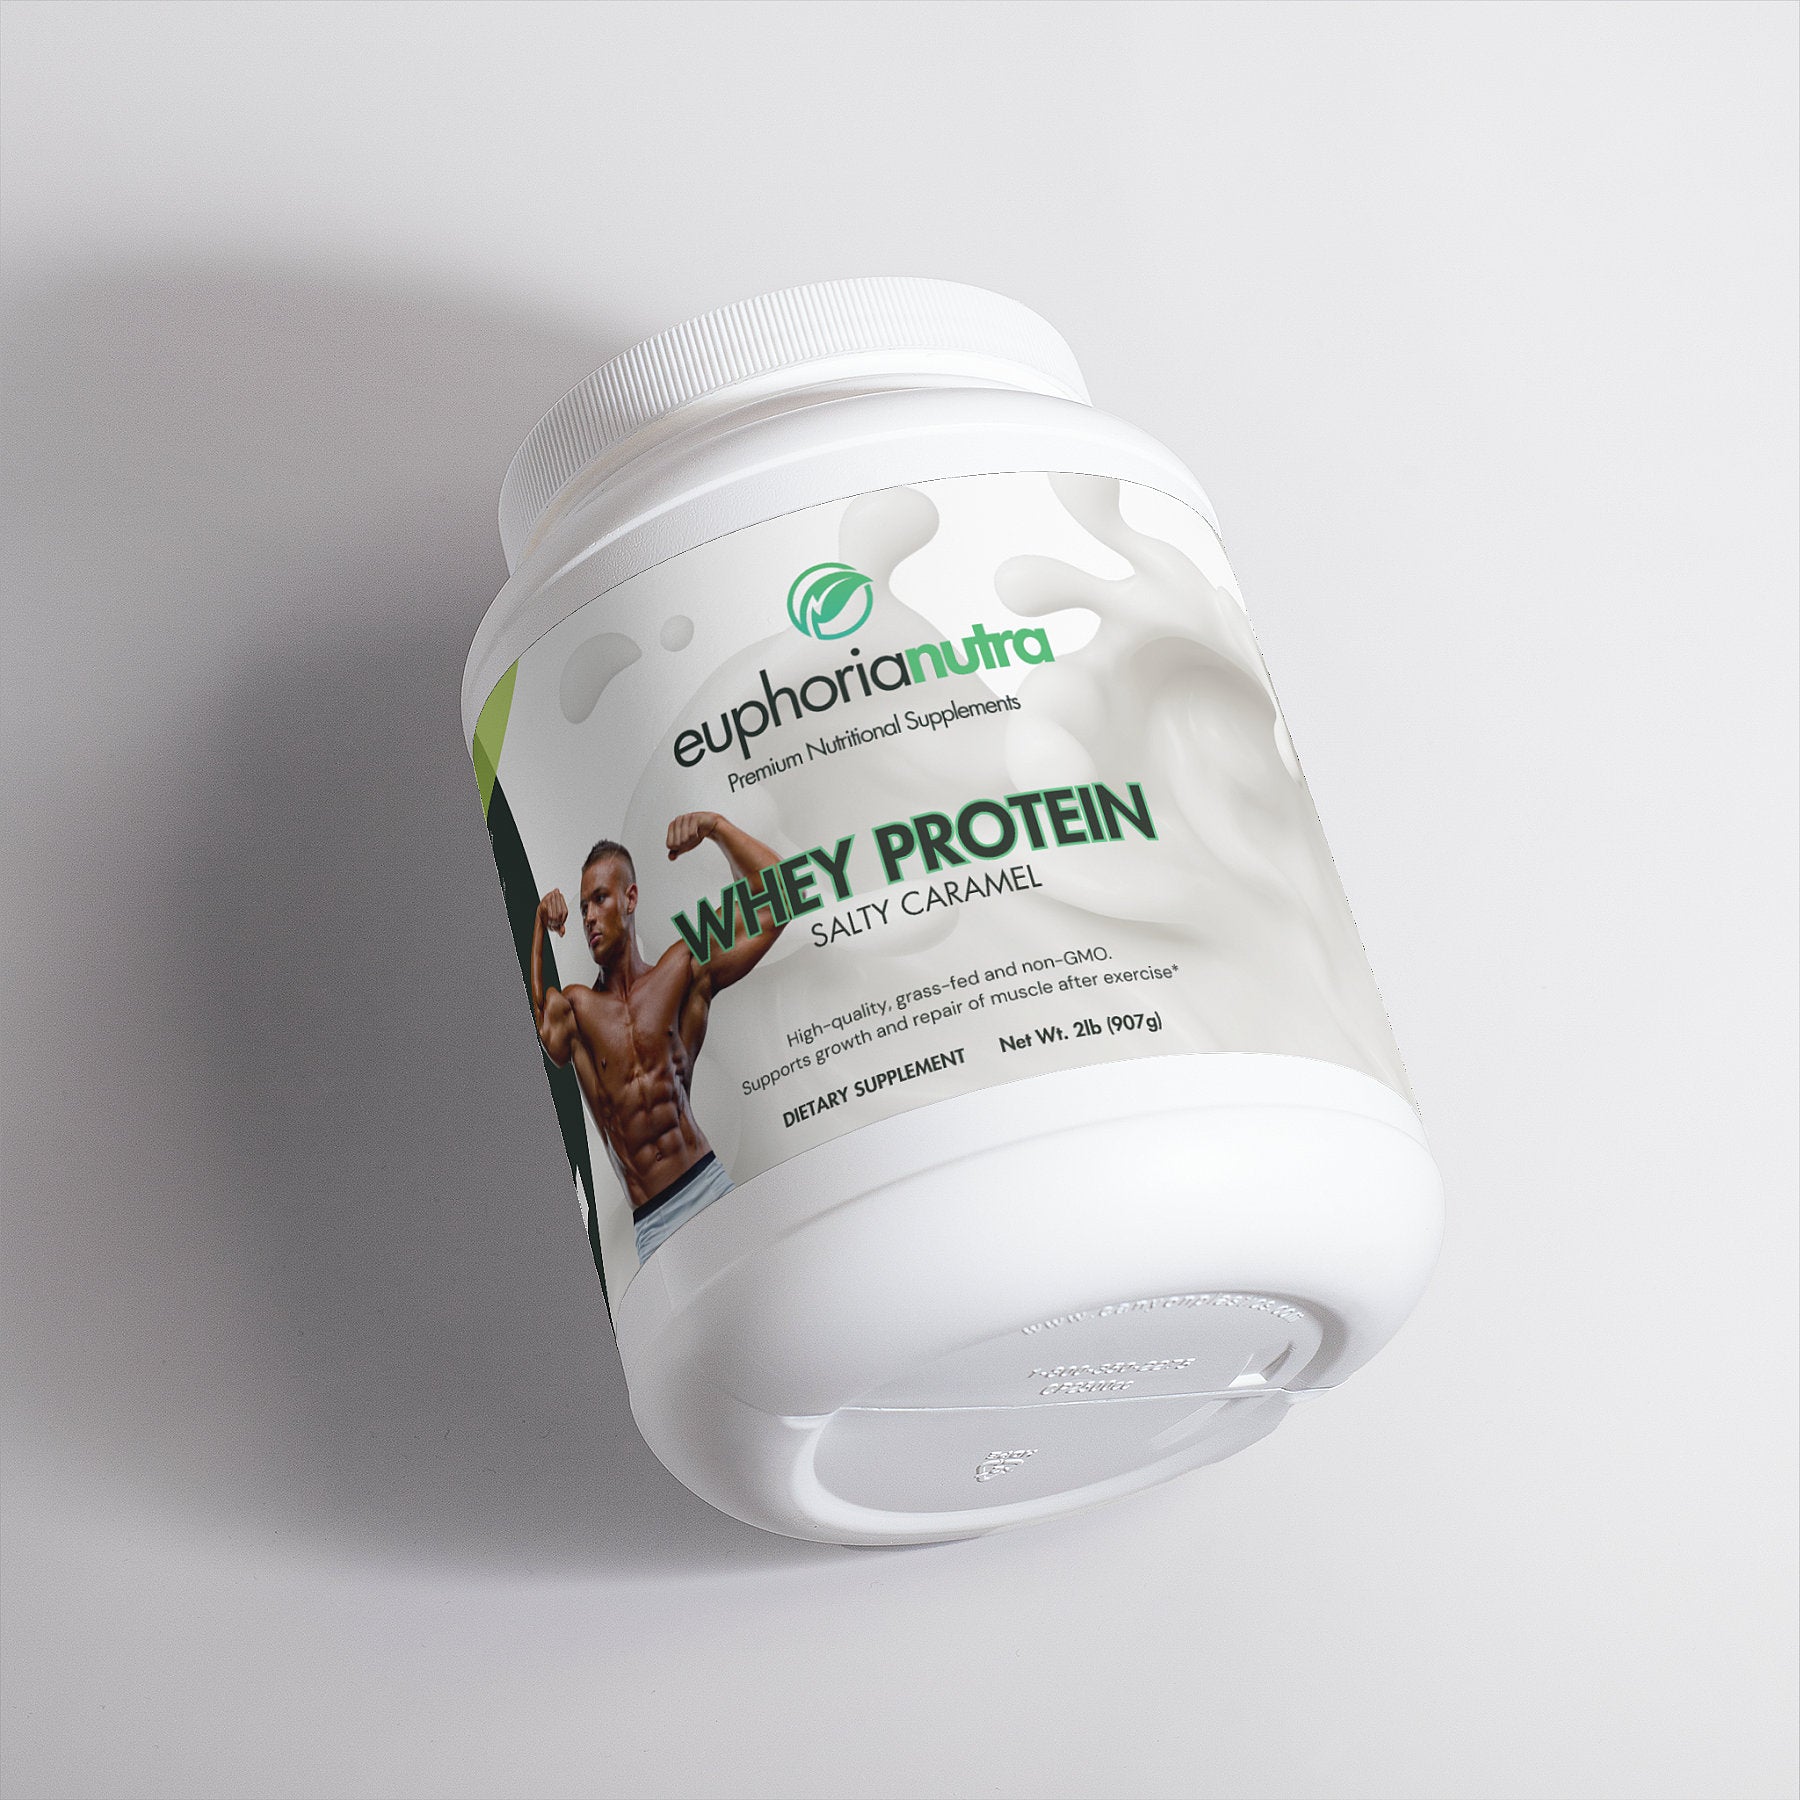 Whey Protein for Fast Muscle Growth & Recovery  EuphoriaNutra